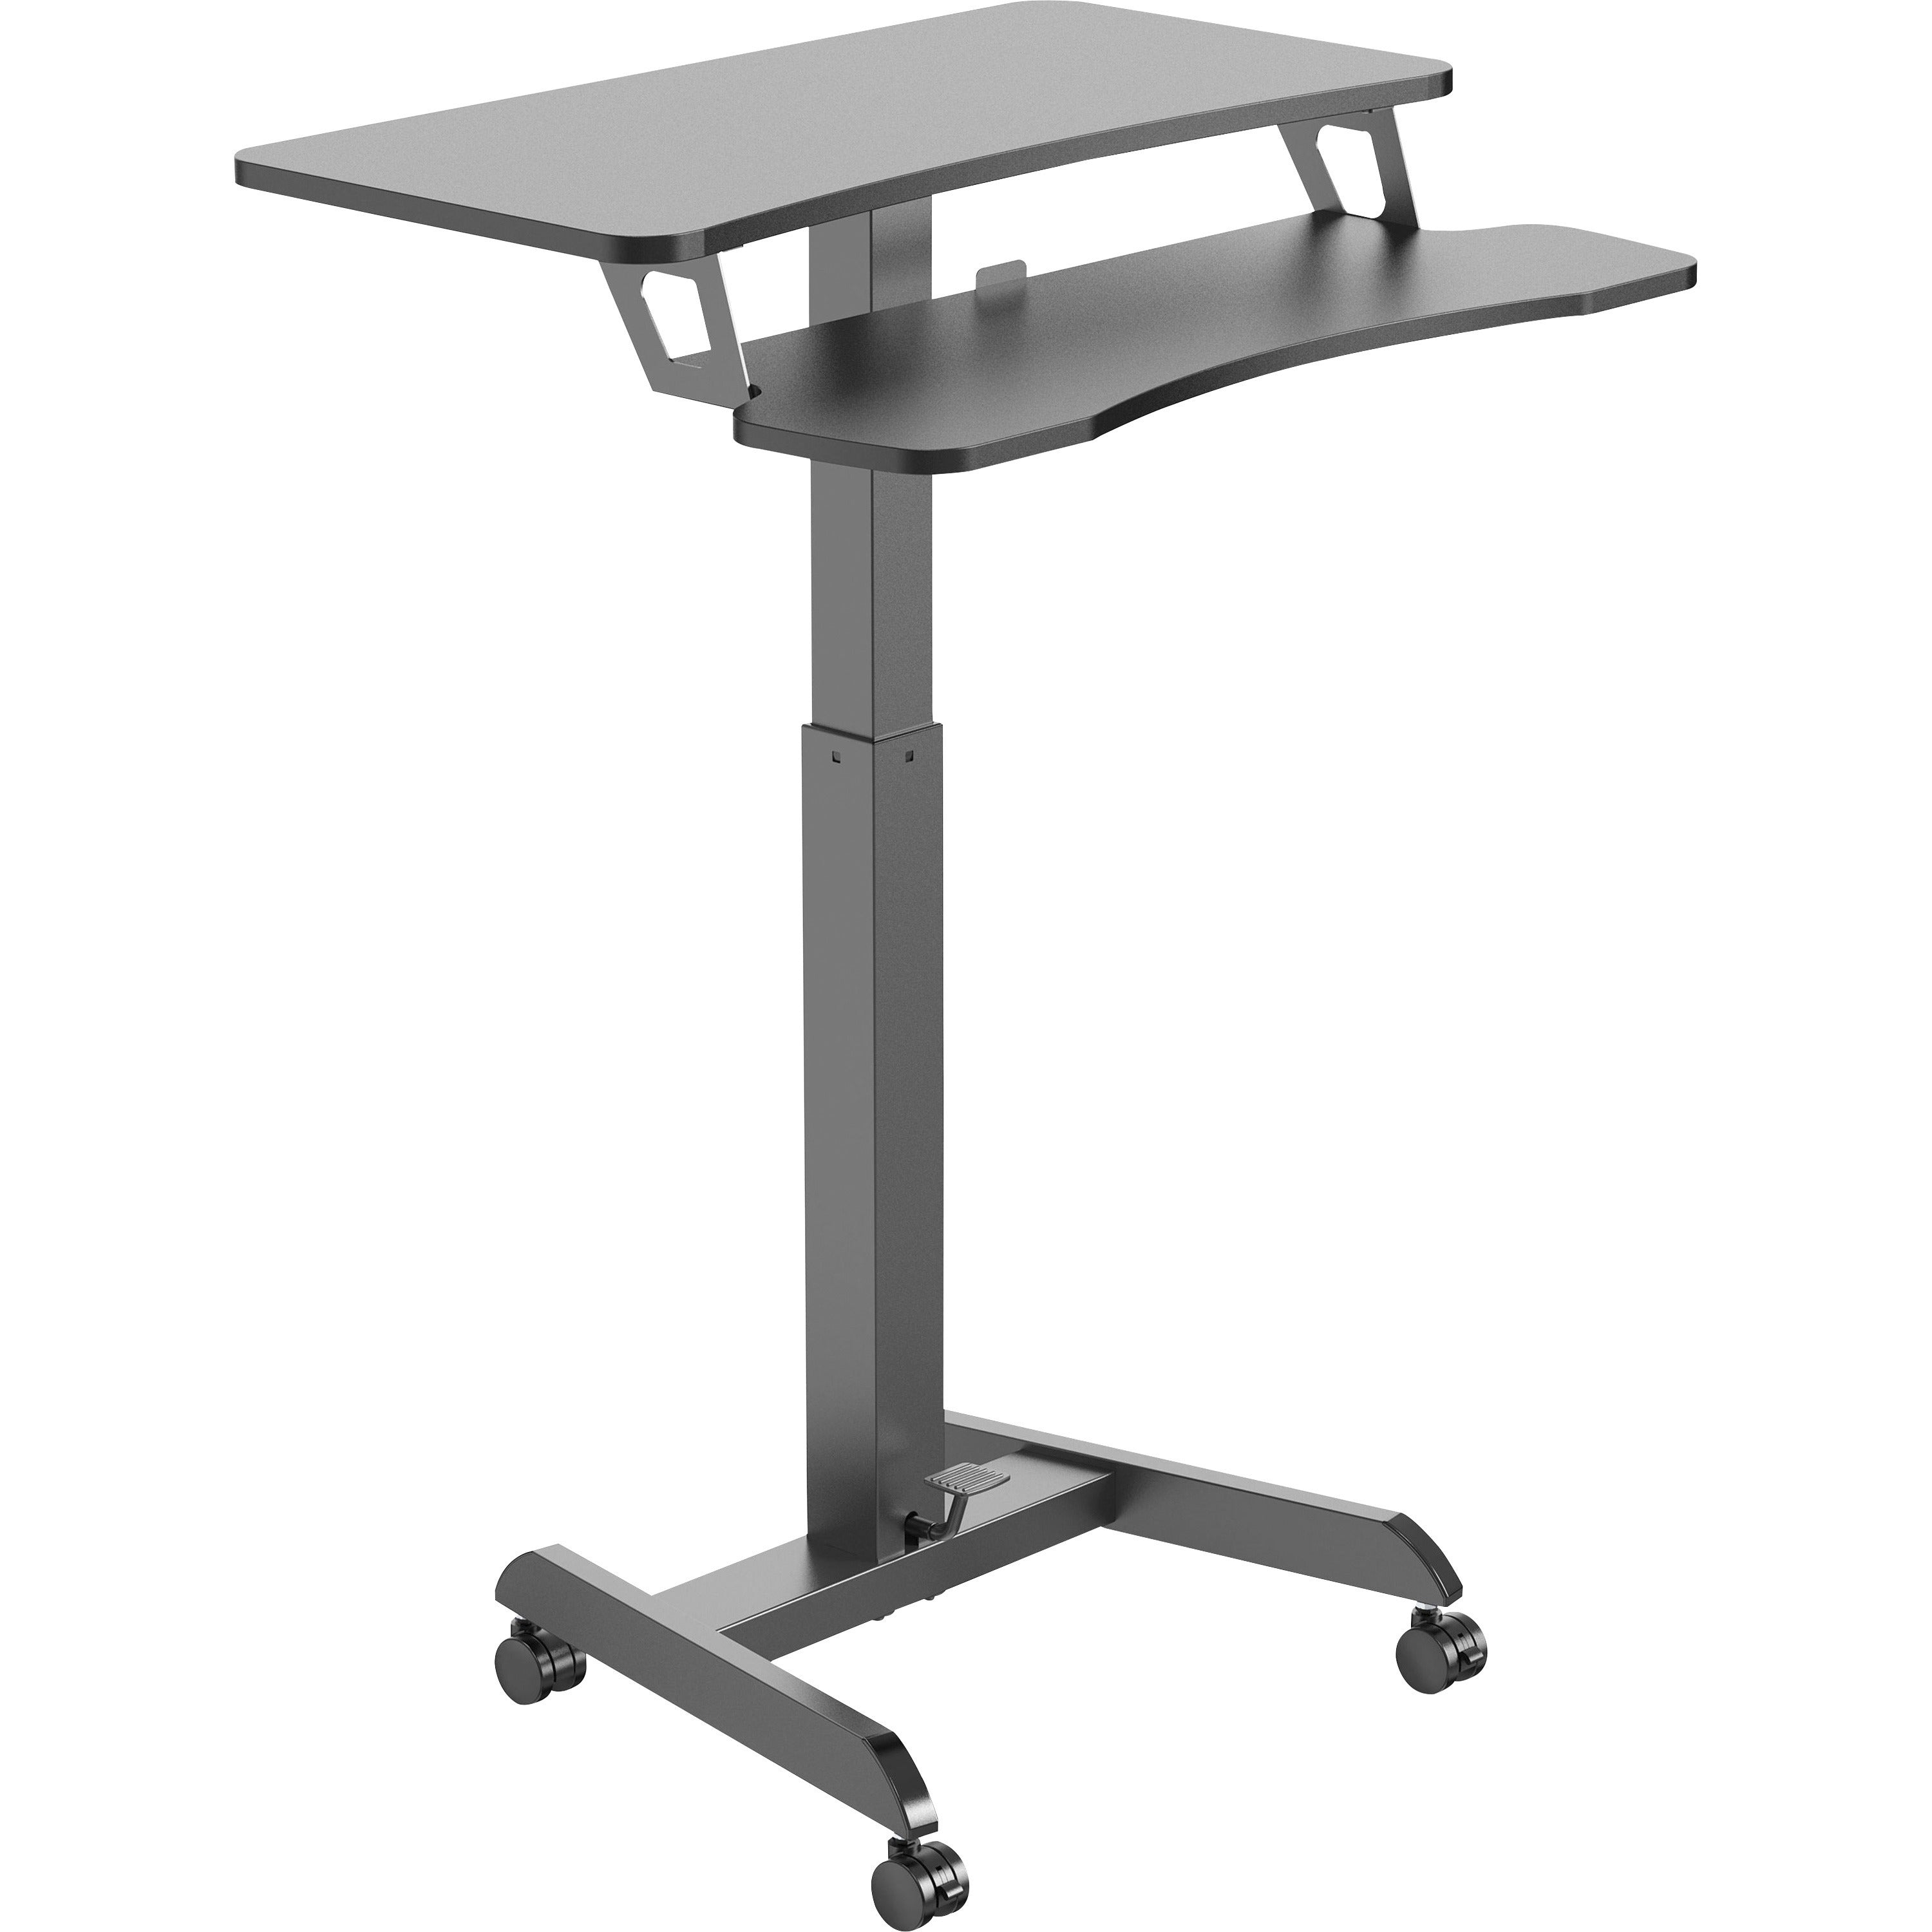 kantek-mobile-sit-to-stand-desk-with-foot-pedal-adjustable-height-1570-table-top-length-x-3150-table-top-width-49-height-assembly-required-black-melamine-top-material-1-each_ktksts350 - 1